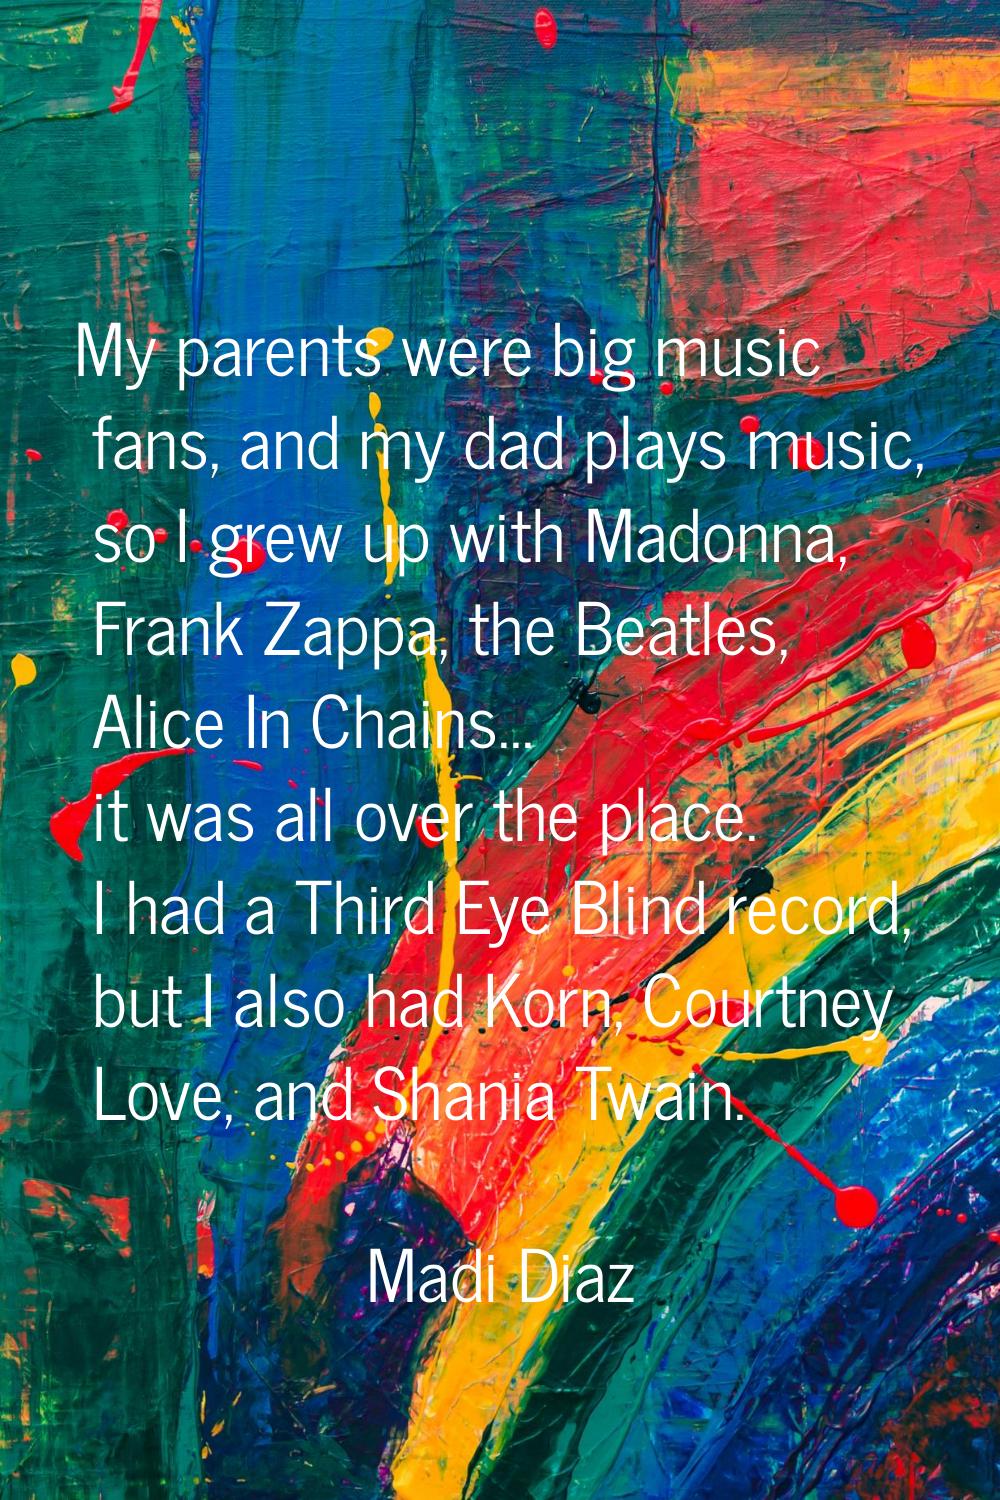 My parents were big music fans, and my dad plays music, so I grew up with Madonna, Frank Zappa, the